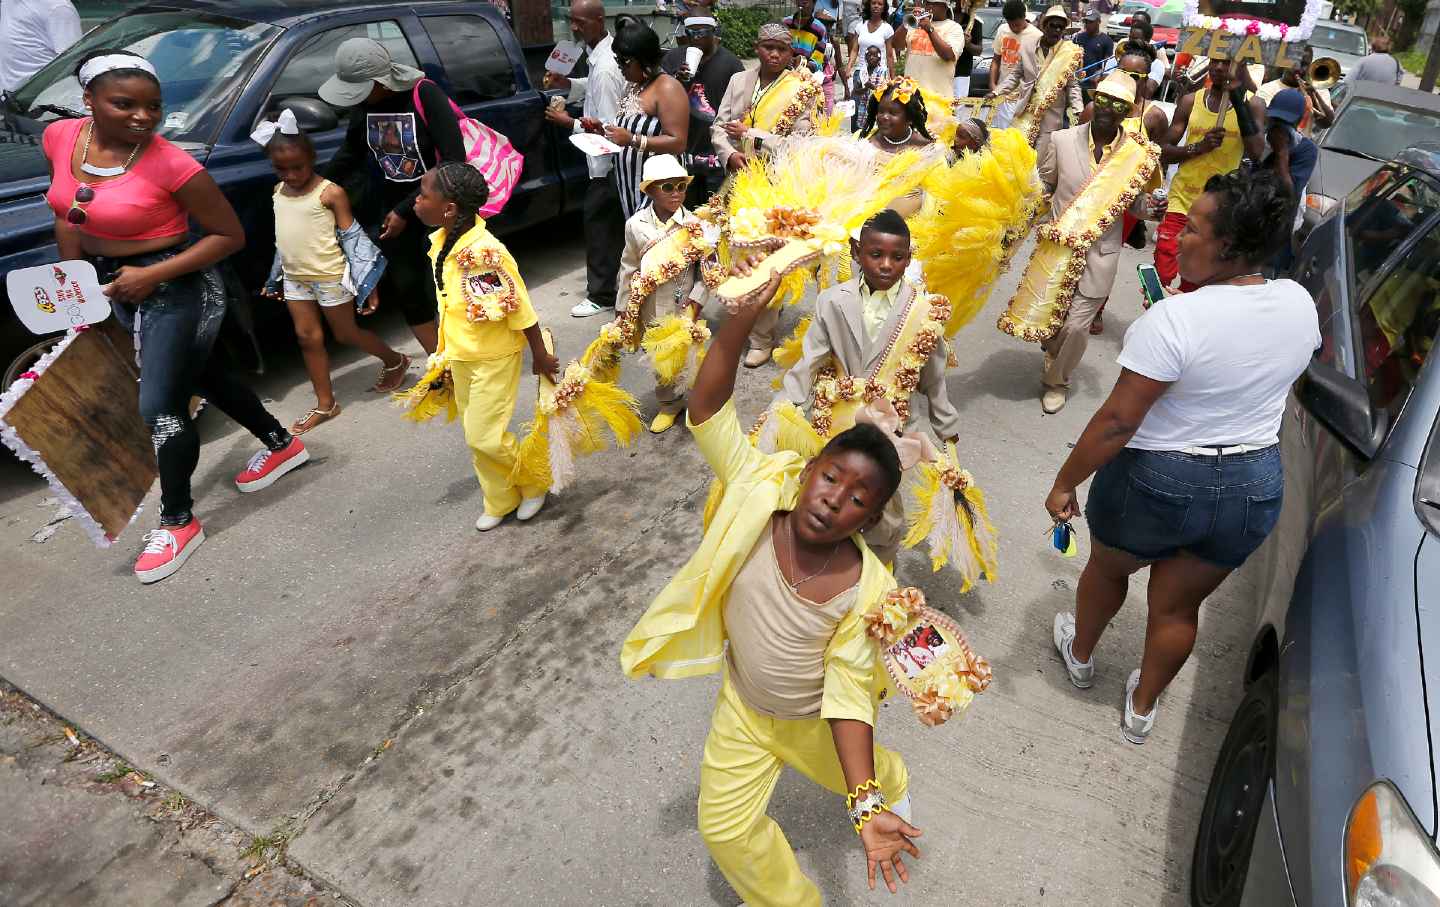 Members of the Original Big Seven Social Aid & Pleasure Club march in the 7th Ward on June 1, 2013, in New Orleans, Louisiana. The second line parade was rescheduled after 19 people were shot and one more injured fleeing the scene on Mother's Day.